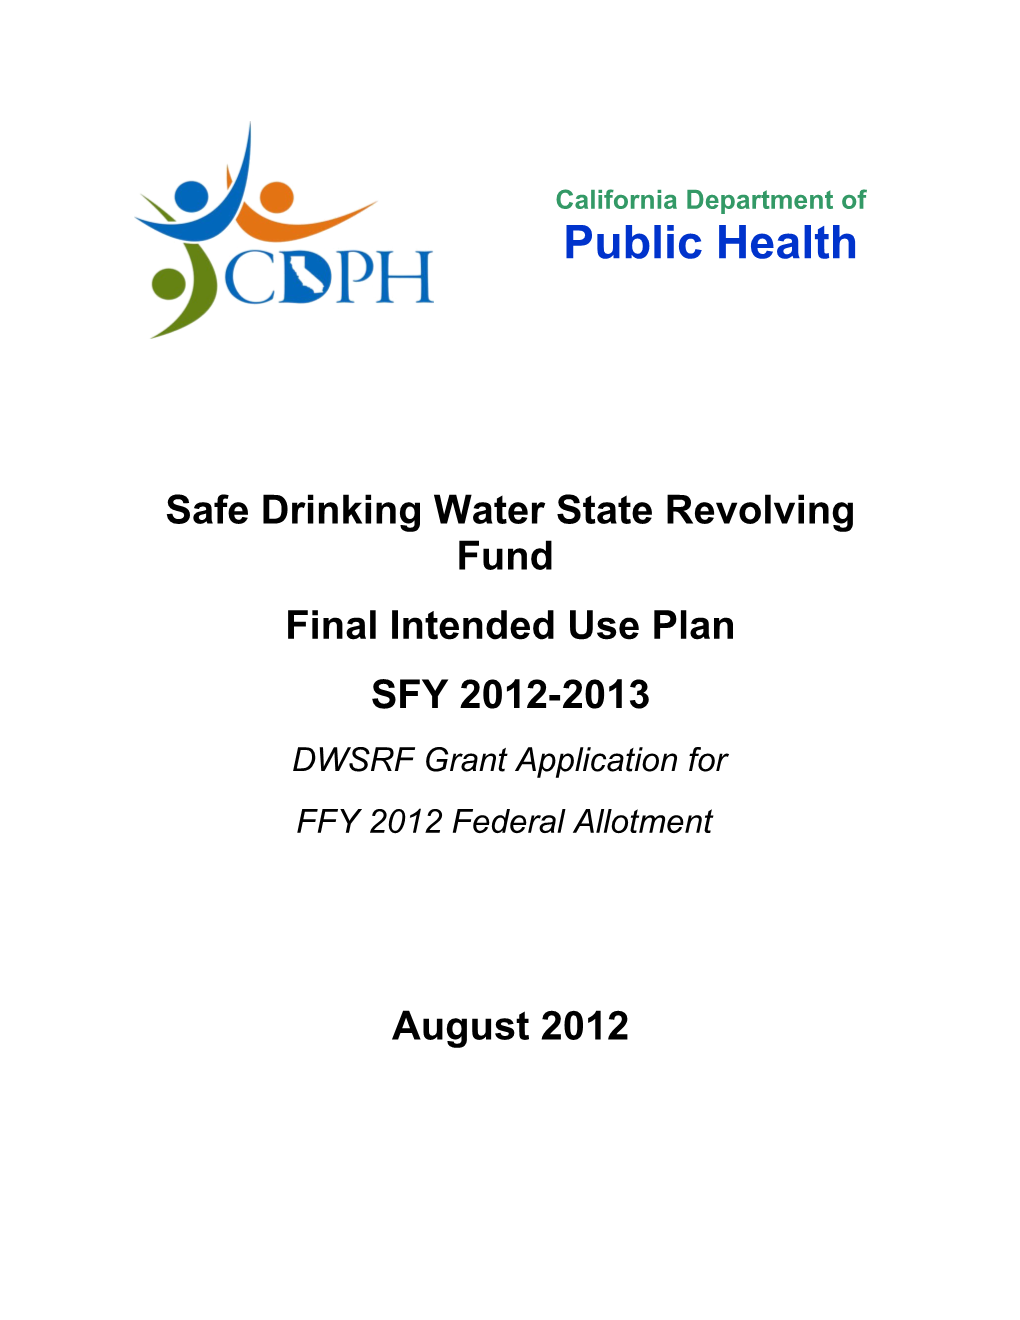 Safe Drinking Water State Revolving Fund